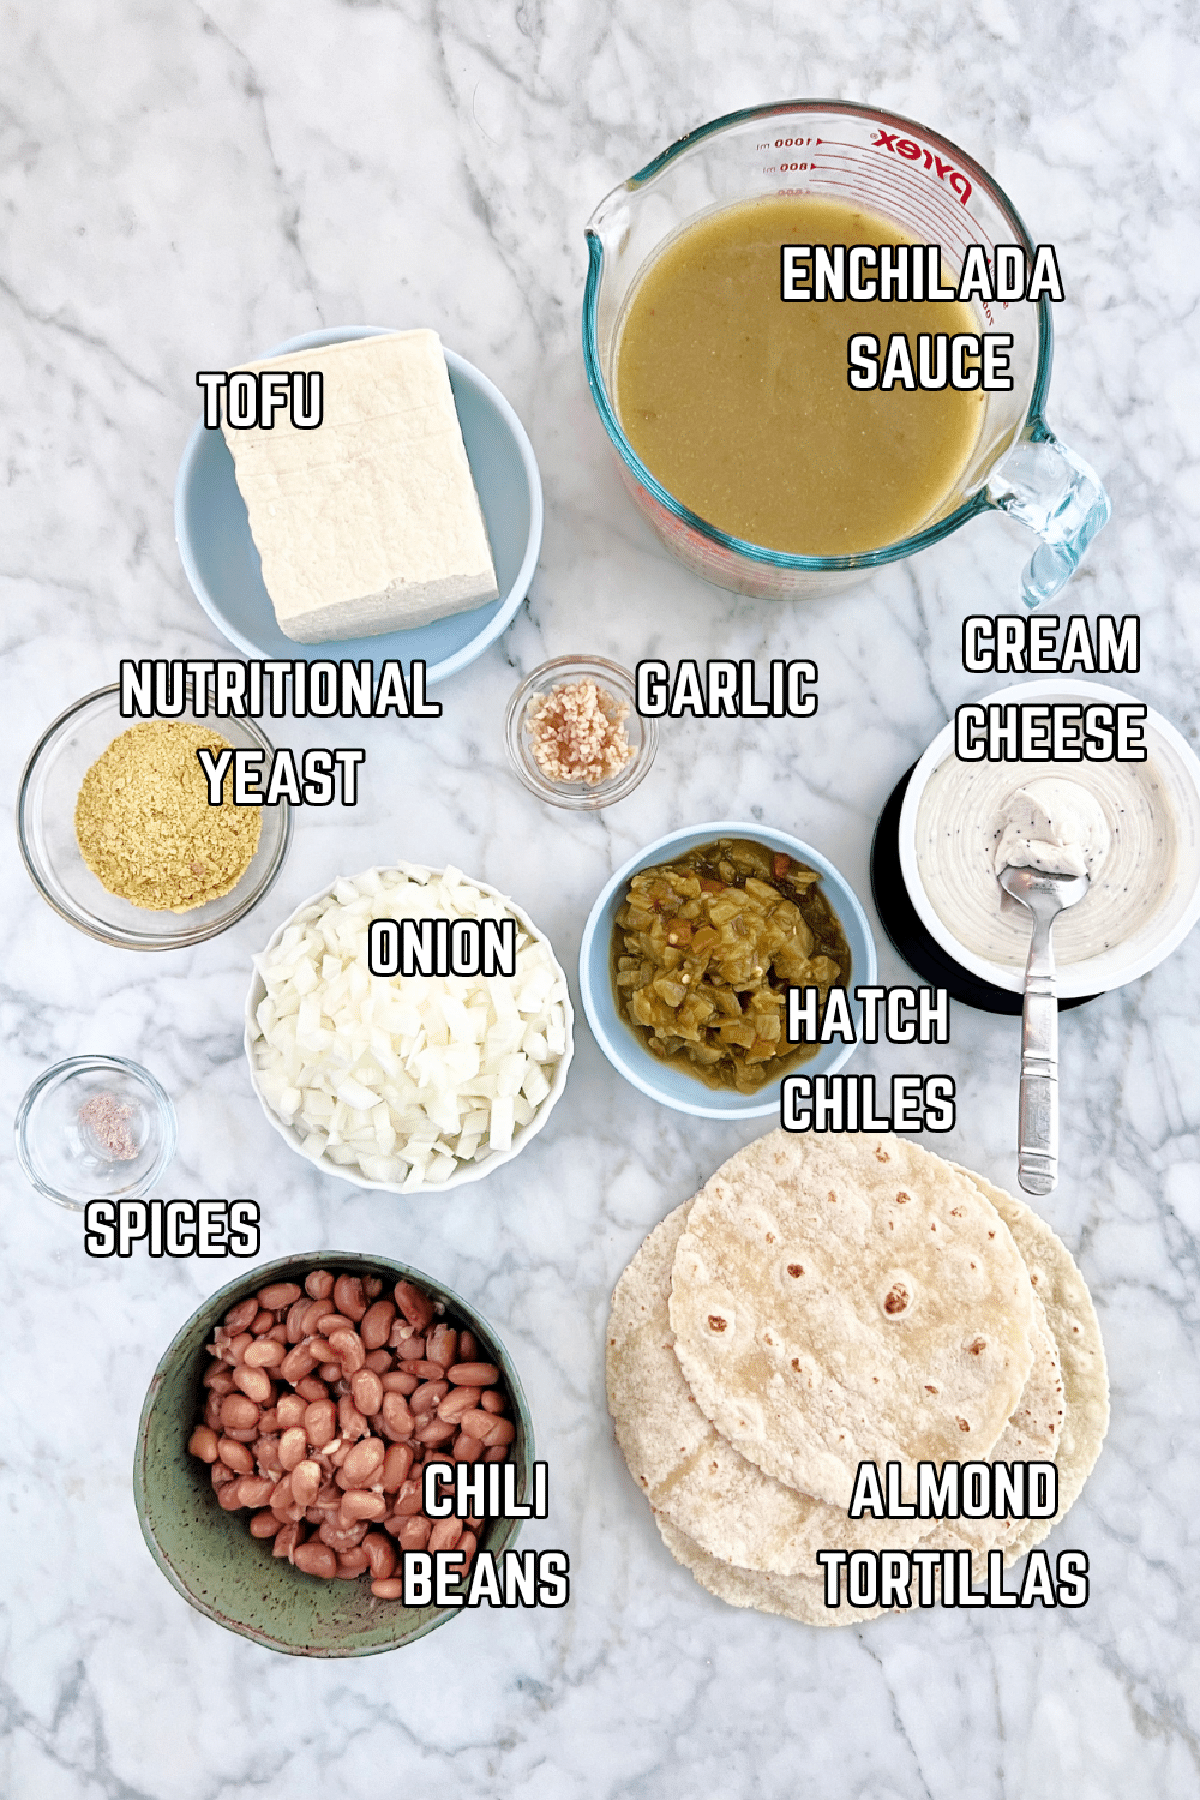 Overhead view of several small bowls of ingredients to make vegan breakfast enchiladas sit on a white marble surface: green enchilada sauce, tofu, nutritional yeast, garlic, onion, spices, Hatch chiles, chili beans, cream cheese, and tortillas.